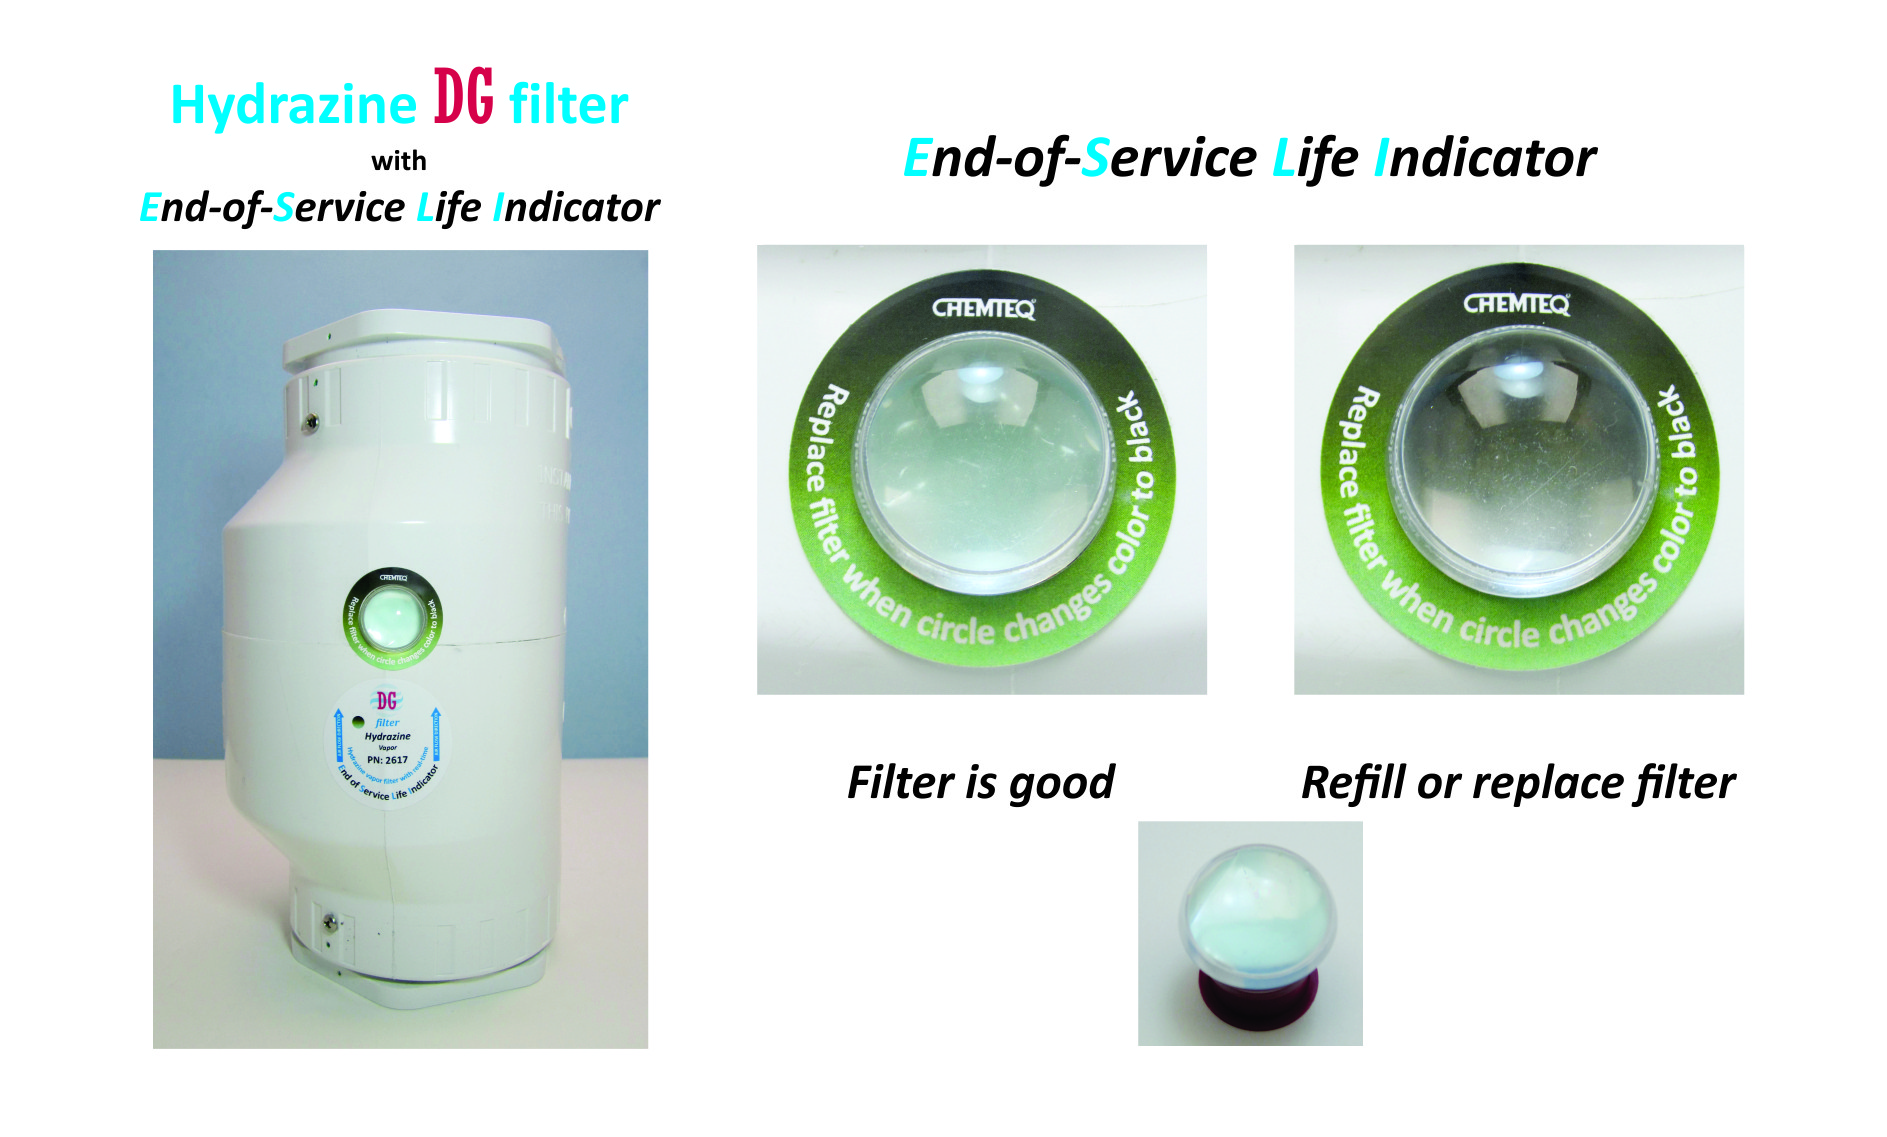 Hydrazine DG FILTER-ESLI-2617. Filter with end of service life indicator for chemical processes and reactor vents.